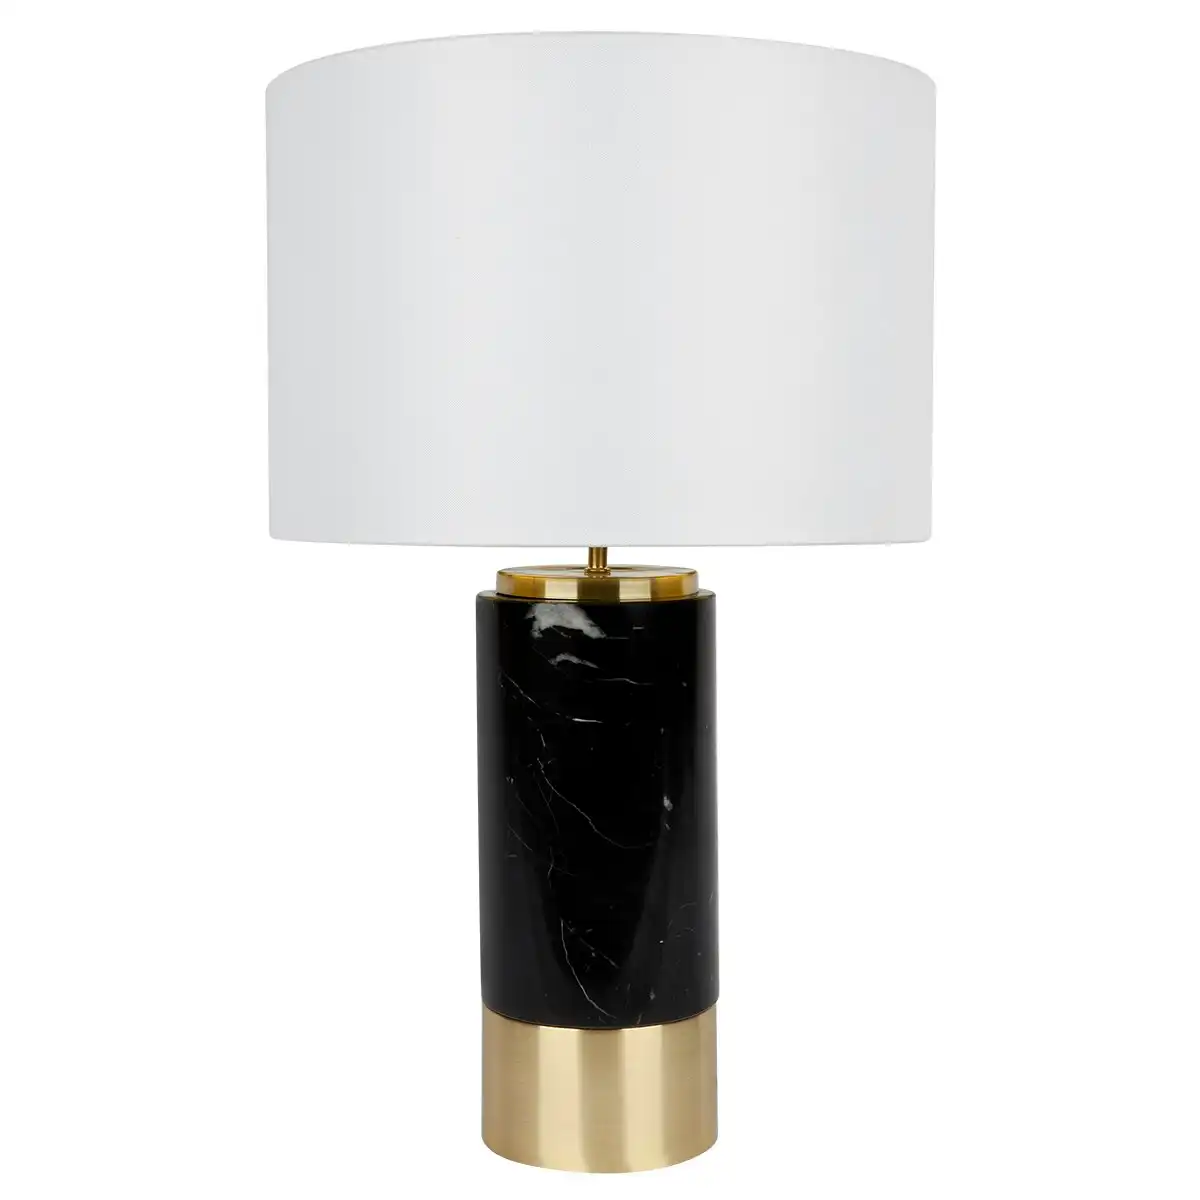 Cafe Lighting Paola Marble Table Lamp - Black with White Shade